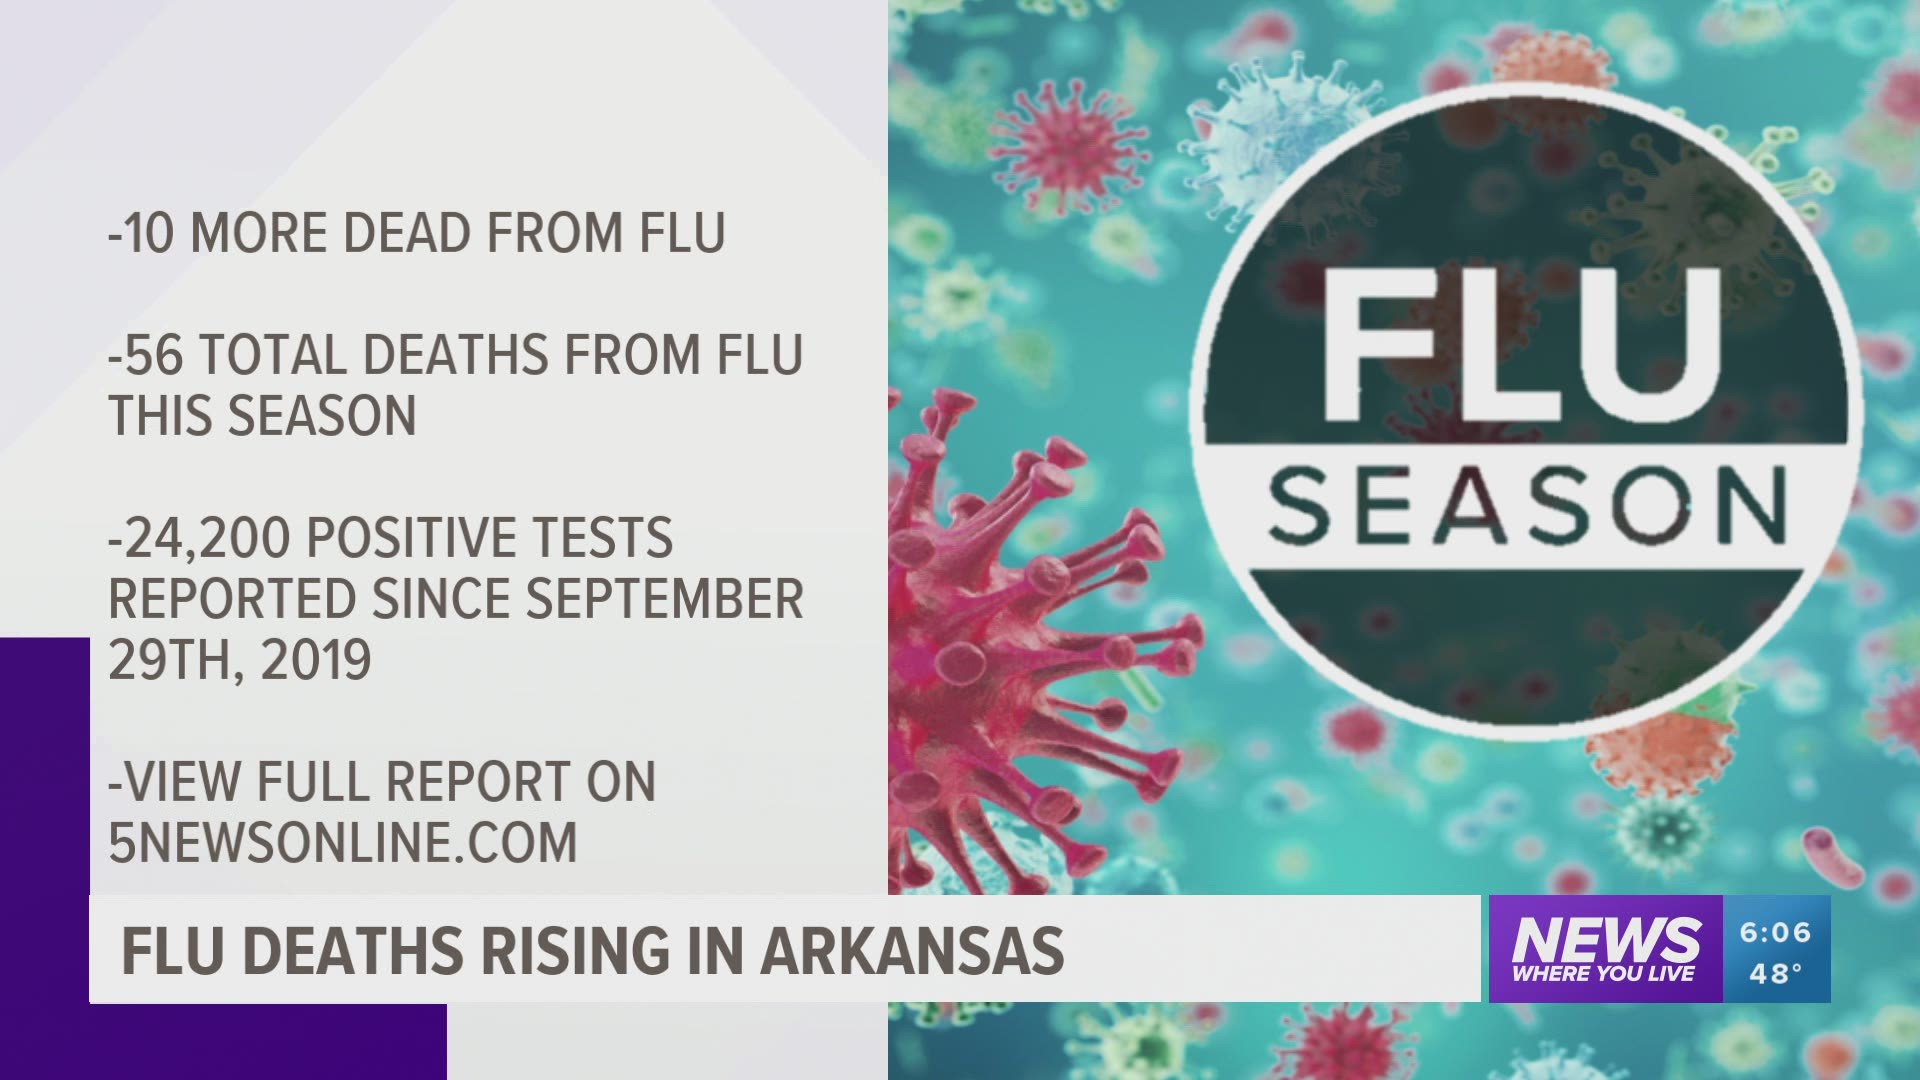 Flurelated deaths in Arkansas continue to rise